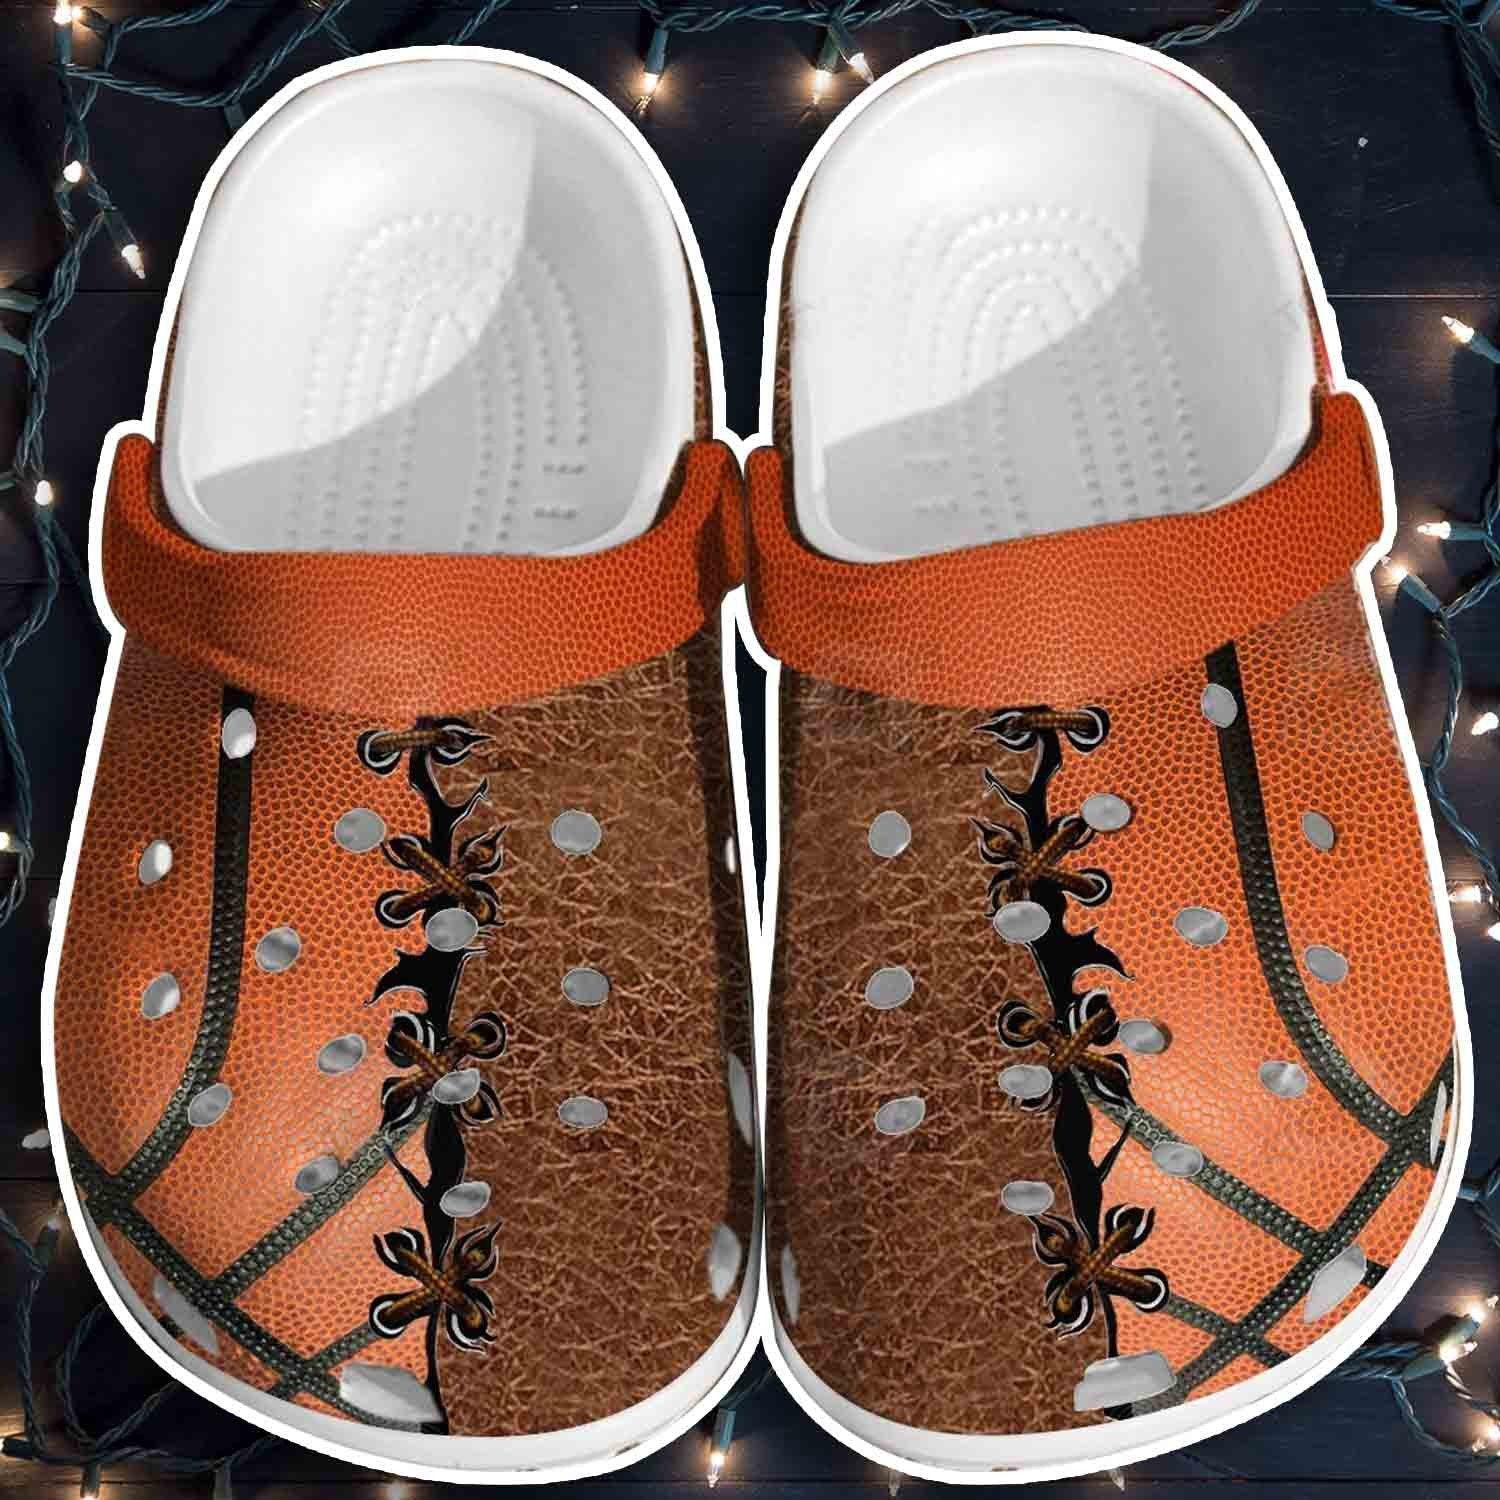 Basketball Leather Skin Croc Shoes Clog Gifts For Son Daughter